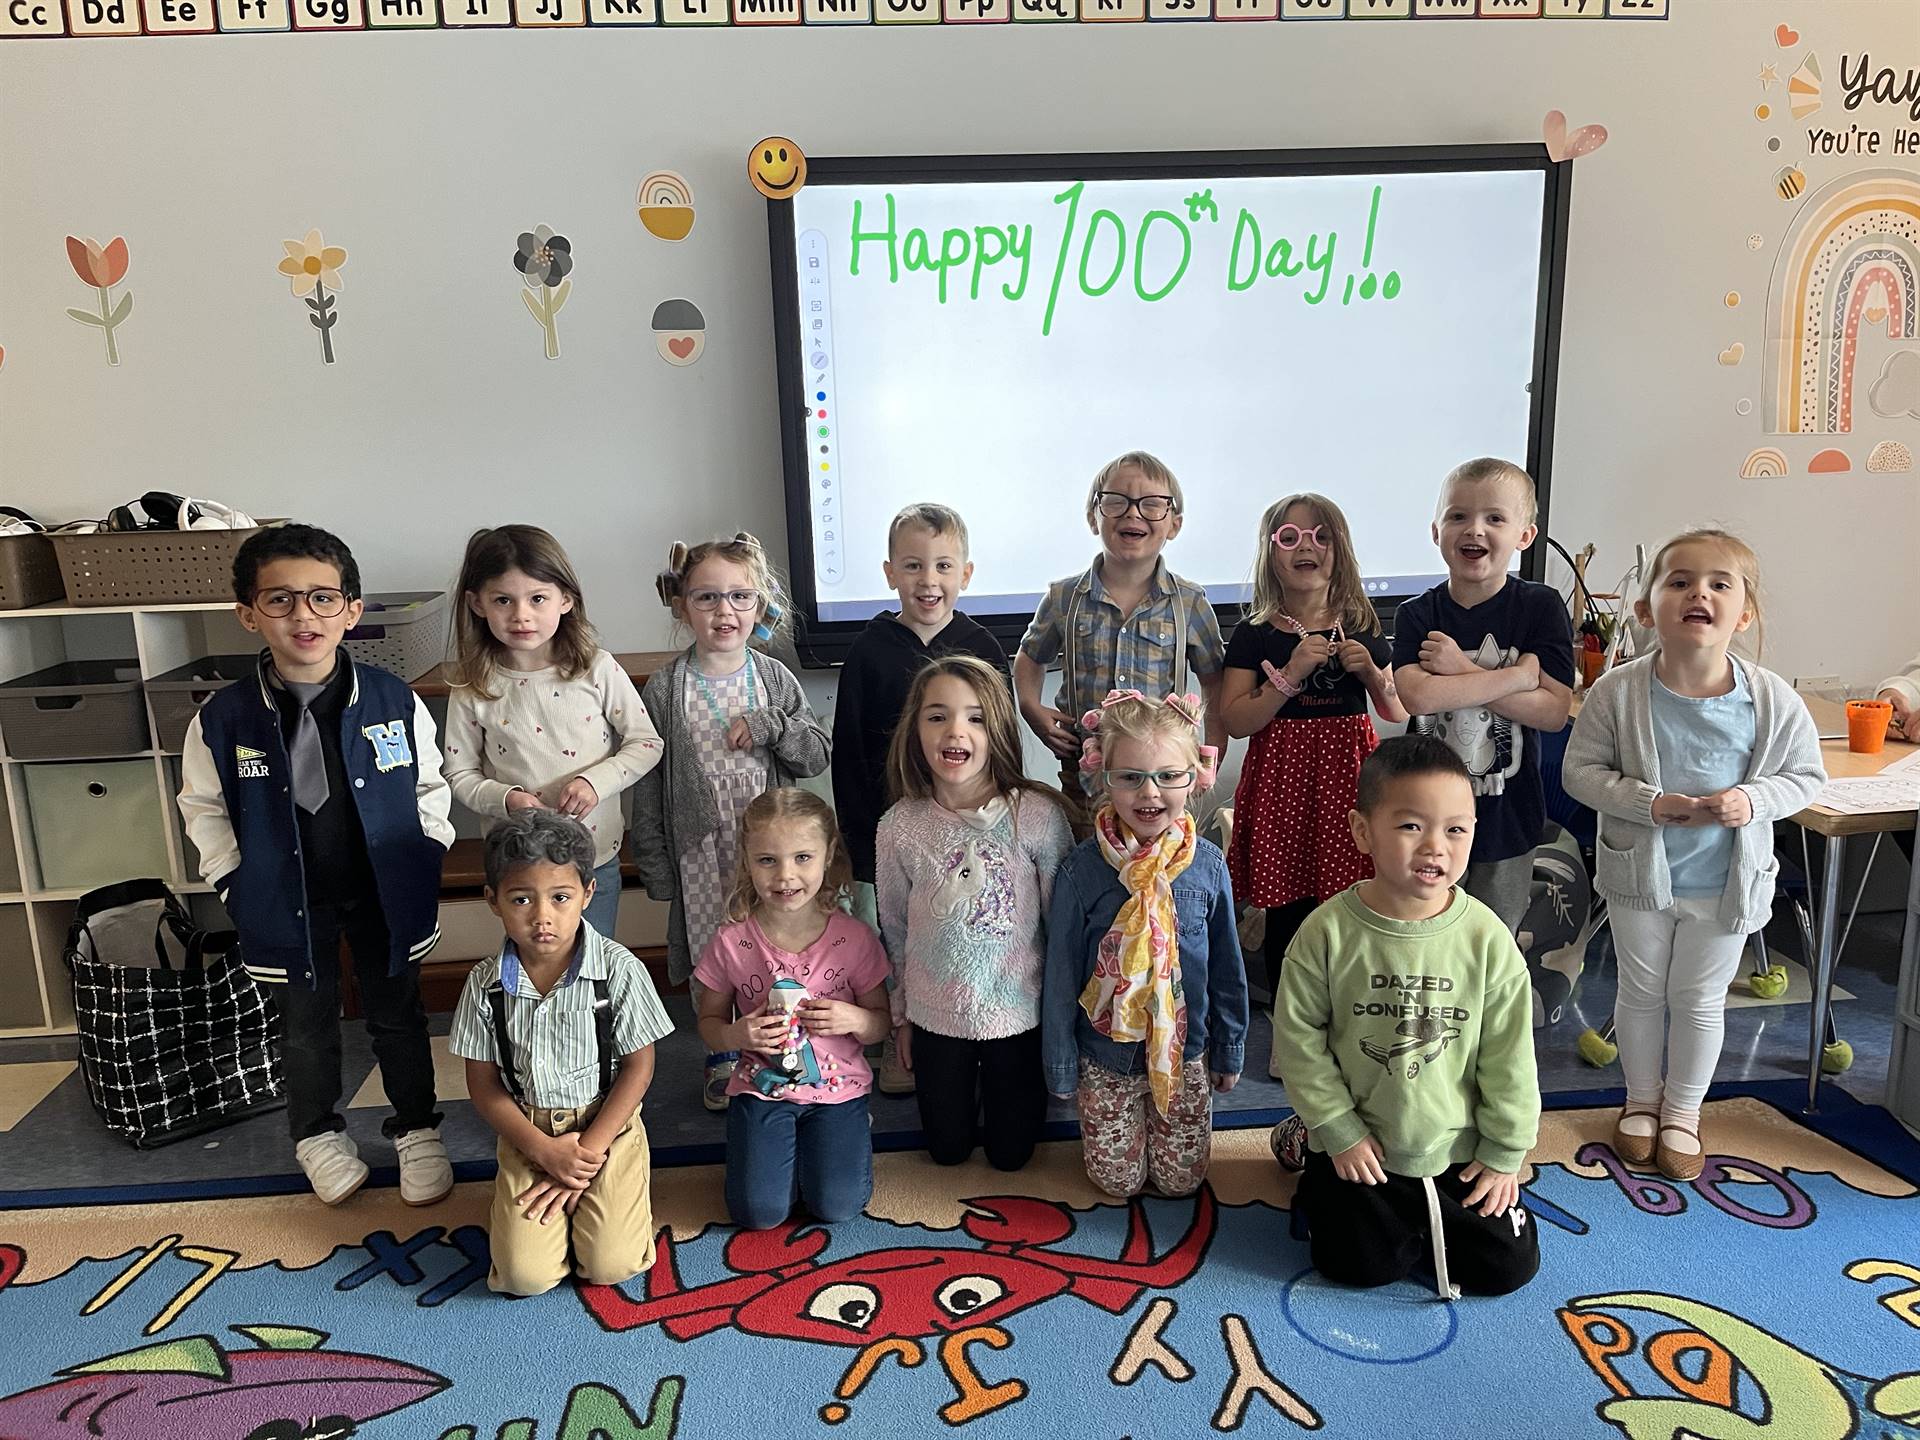 students dressed up as 100 yrs. old.